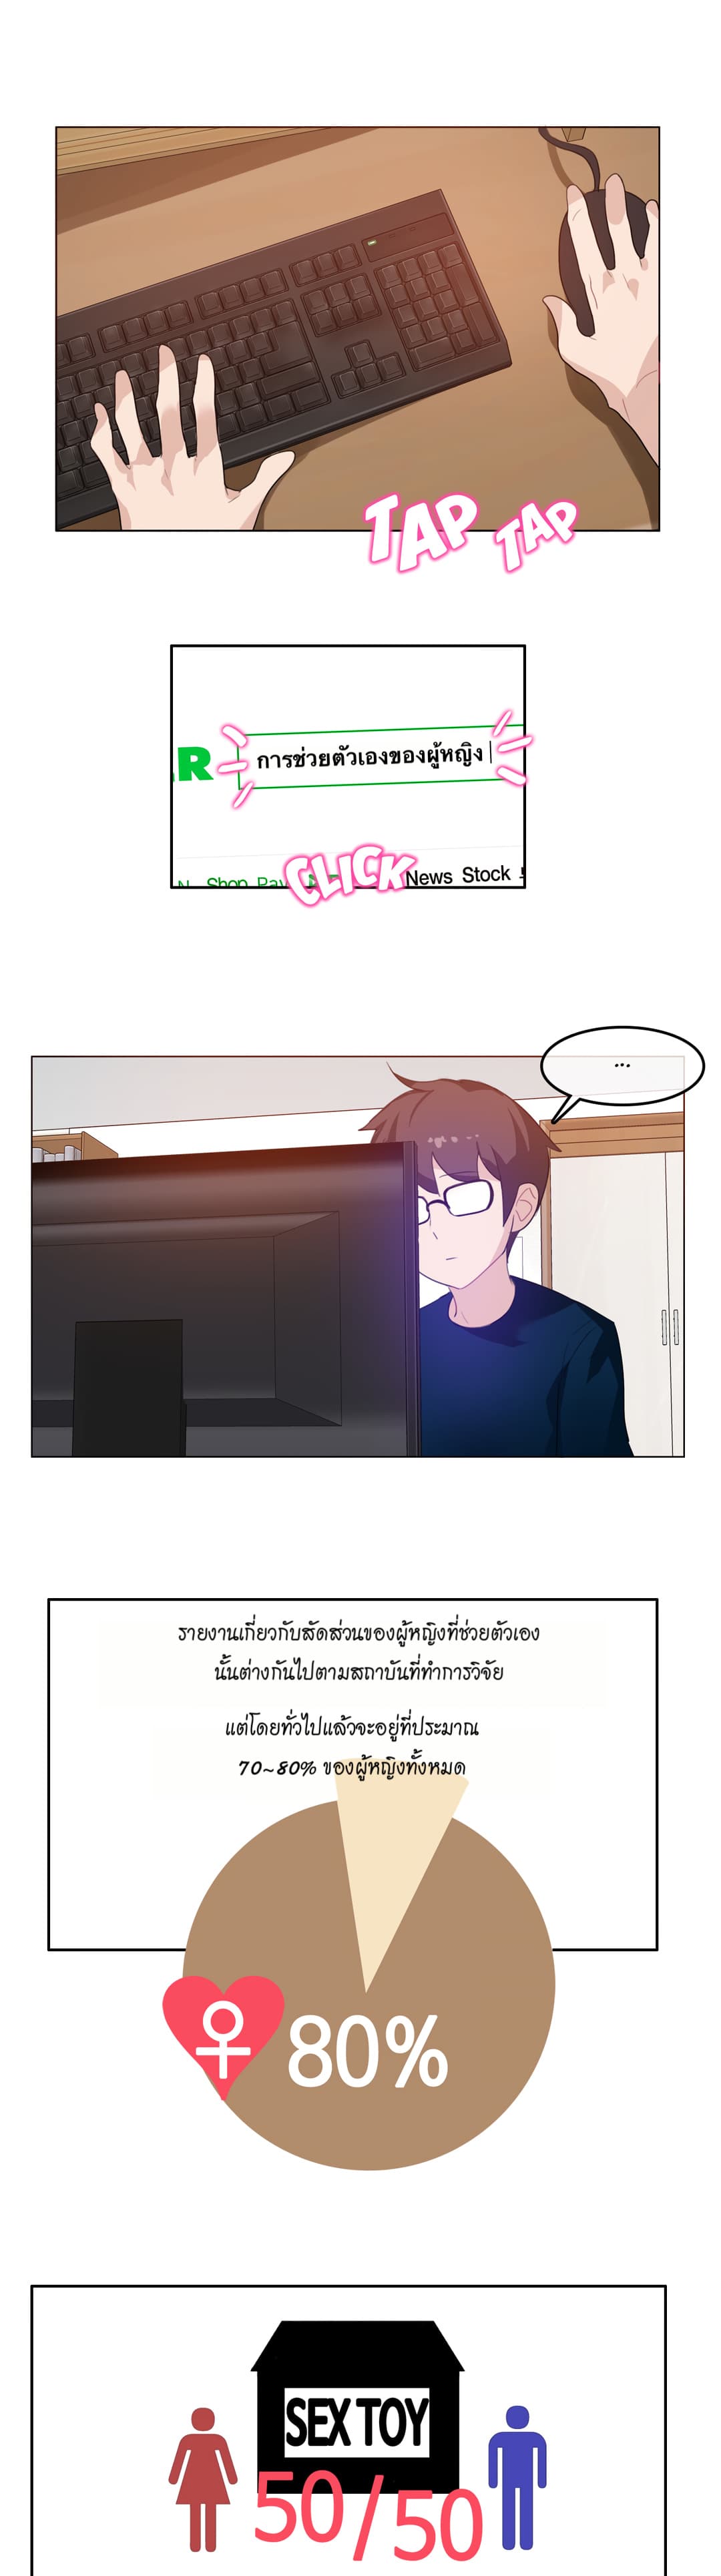 A Pervert’s Daily Life 8 (1)